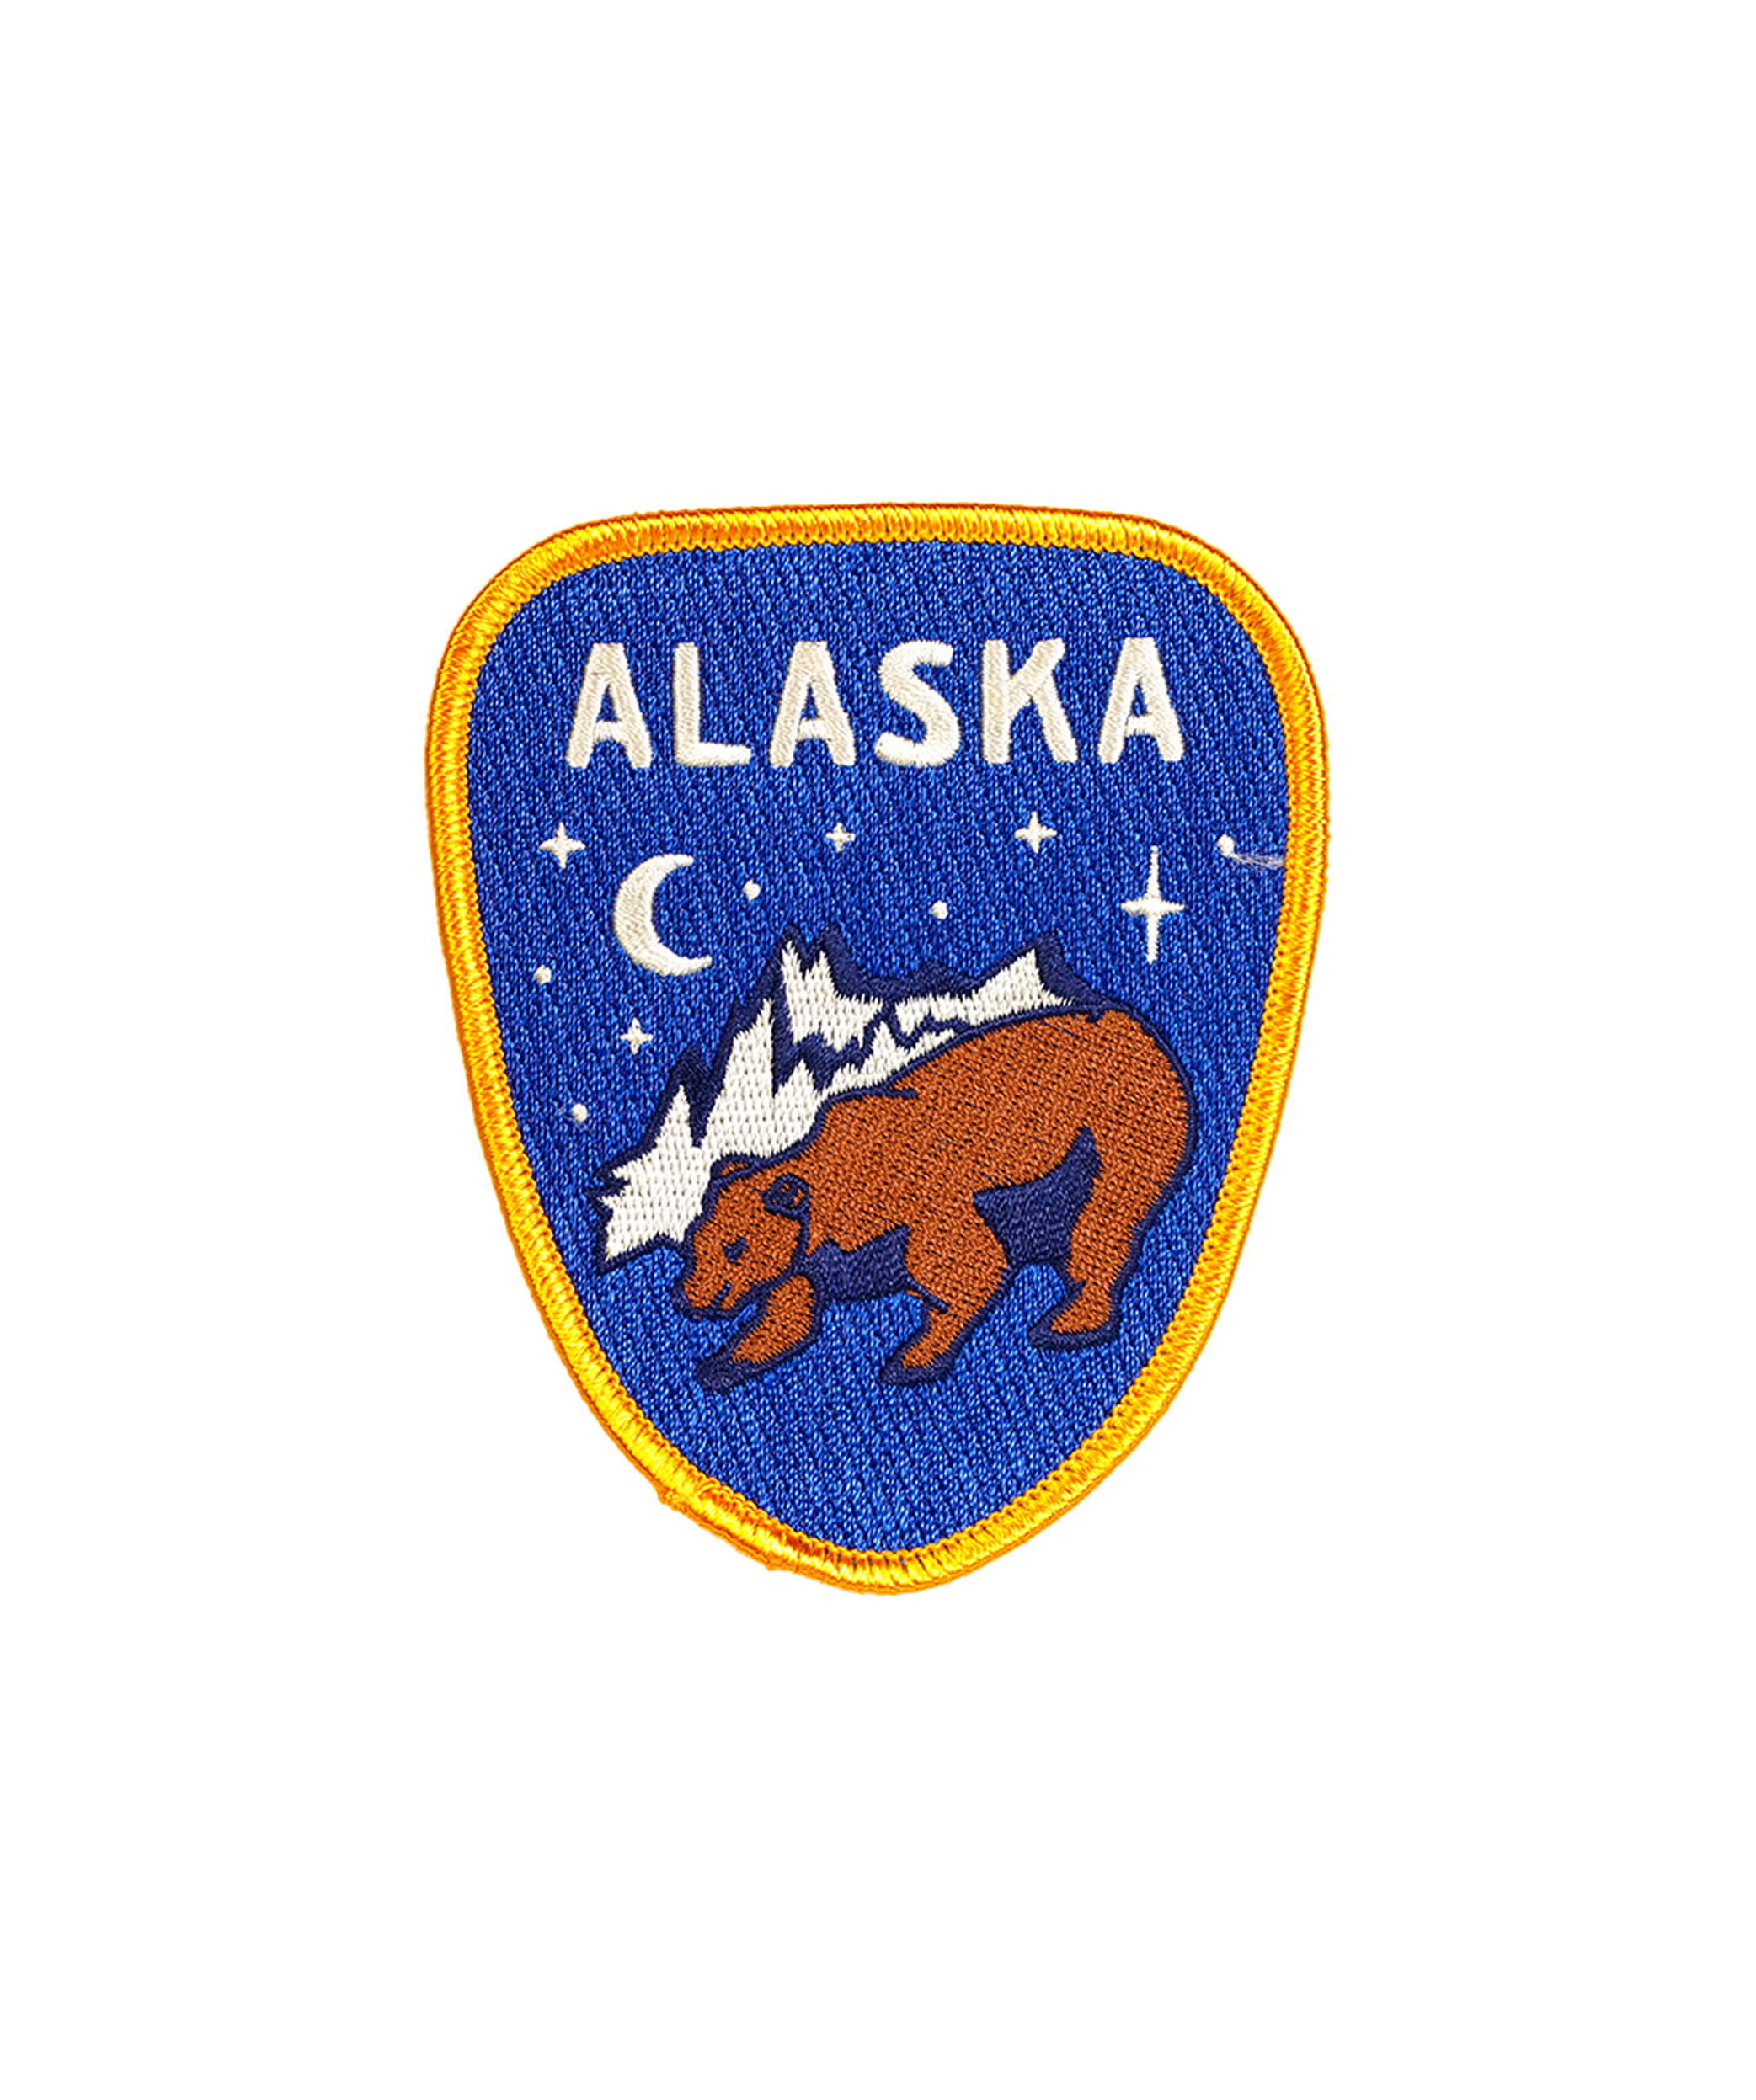 Alaska State Silhouette Multi-Color Embroidered Iron-On Patch Applique